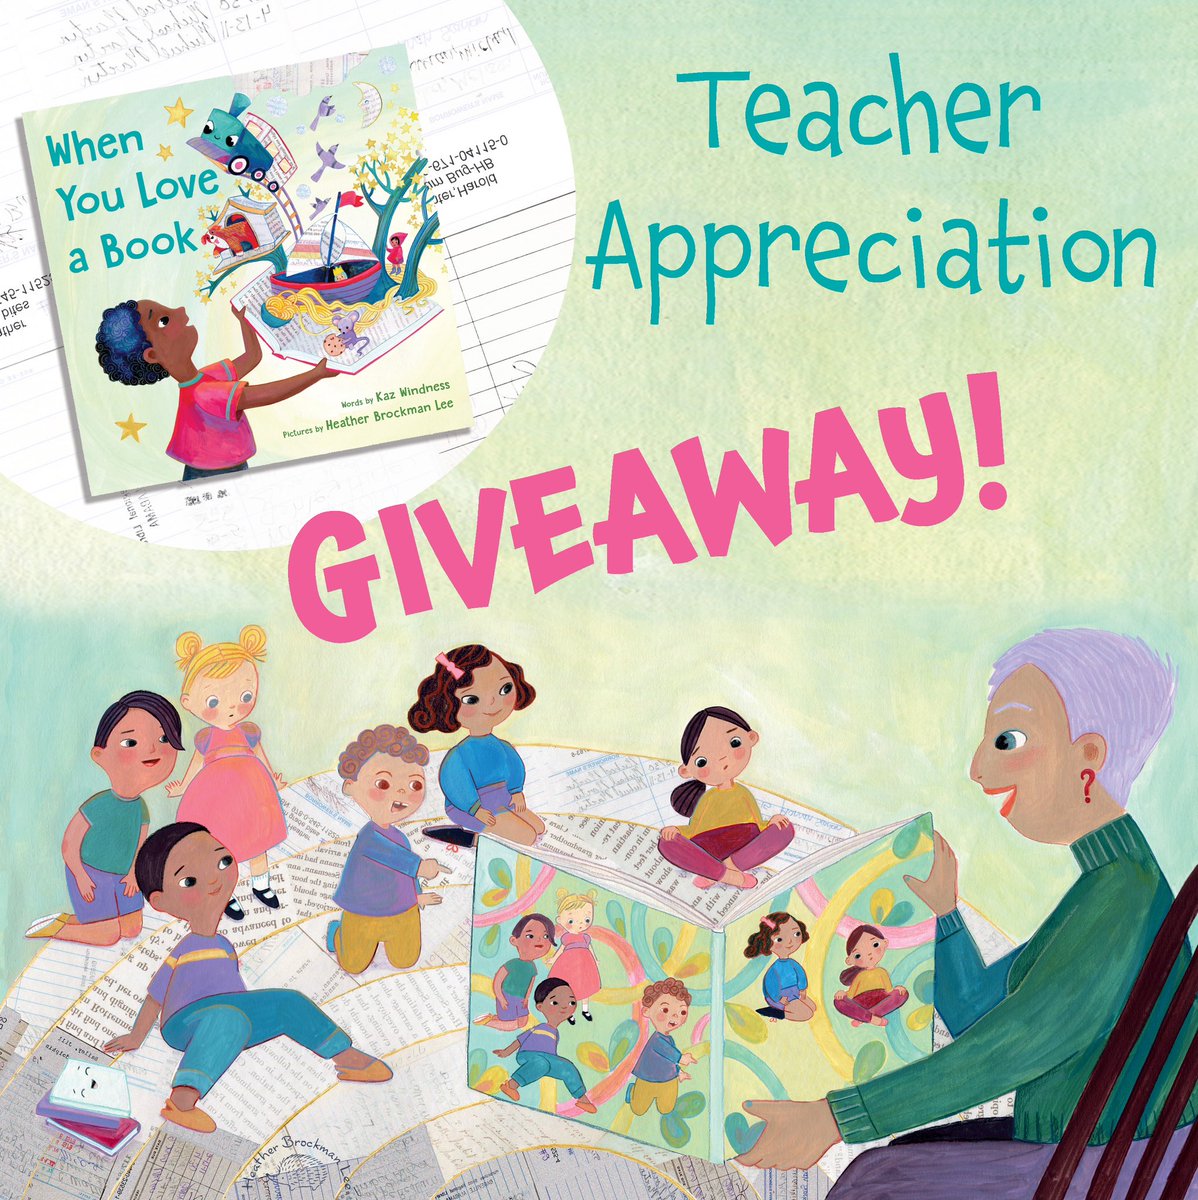 When you love a teacher- We do! so for teacher appreciation week we will #giveaway a copy of our new book, signed by both @KWindness and me, to a wonderful teacher! To enter Like, Share and Comment. Not a teacher? Please tag your favorite teachers here! #TeacherAppreciationWeek